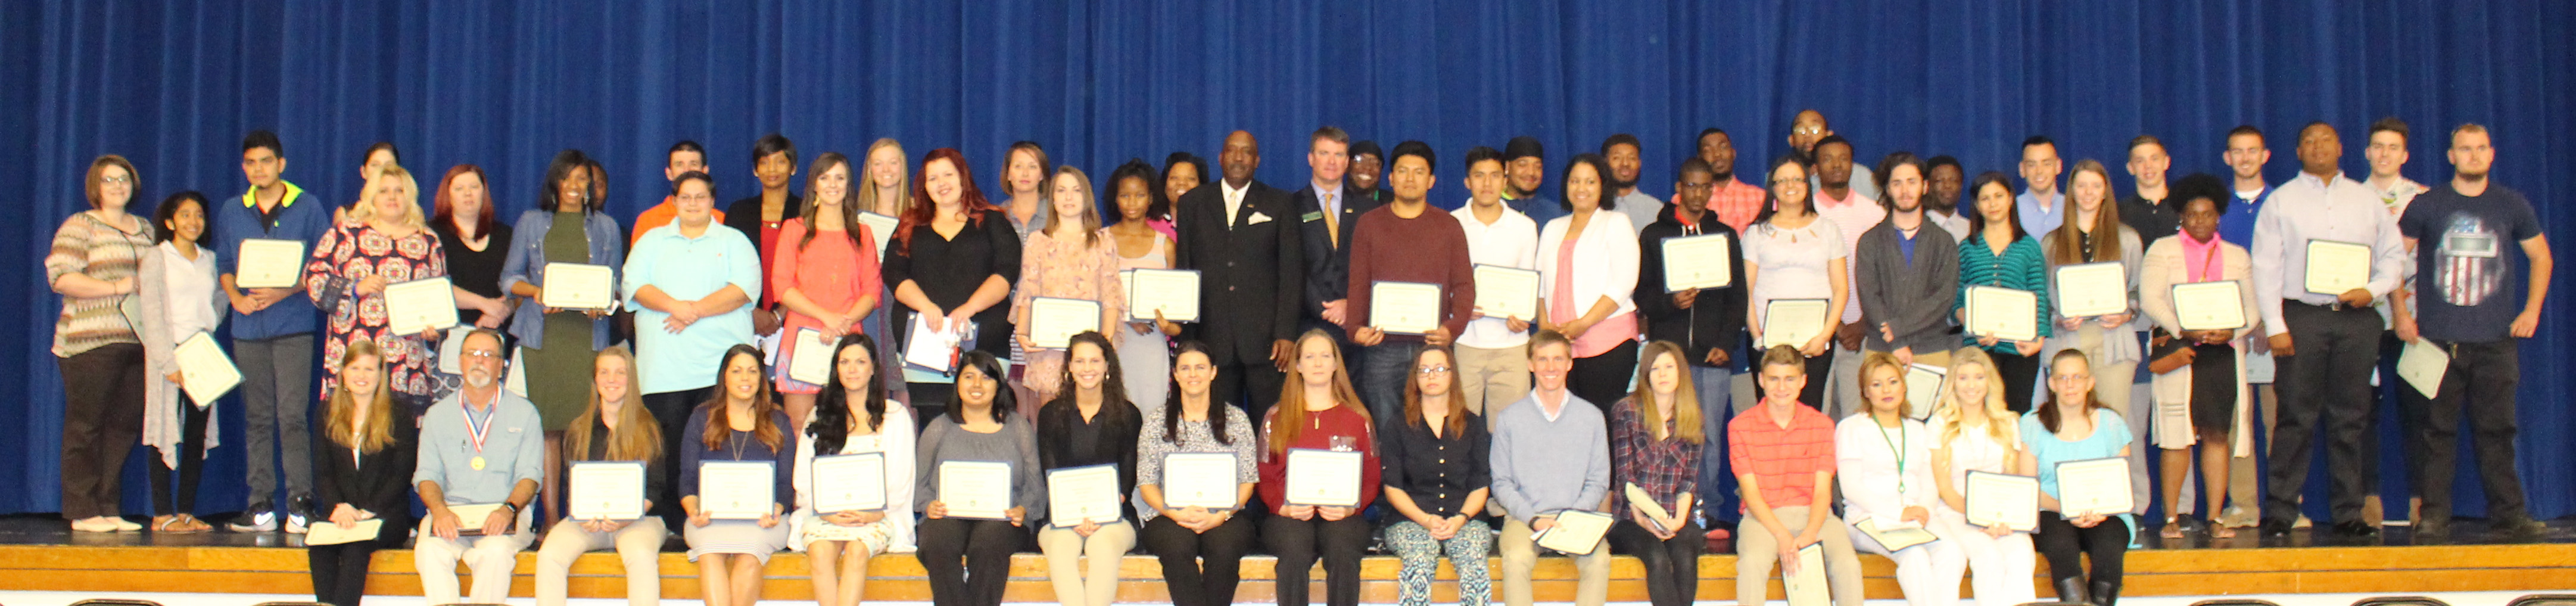 BCC Awards Students with Outstanding Achievements